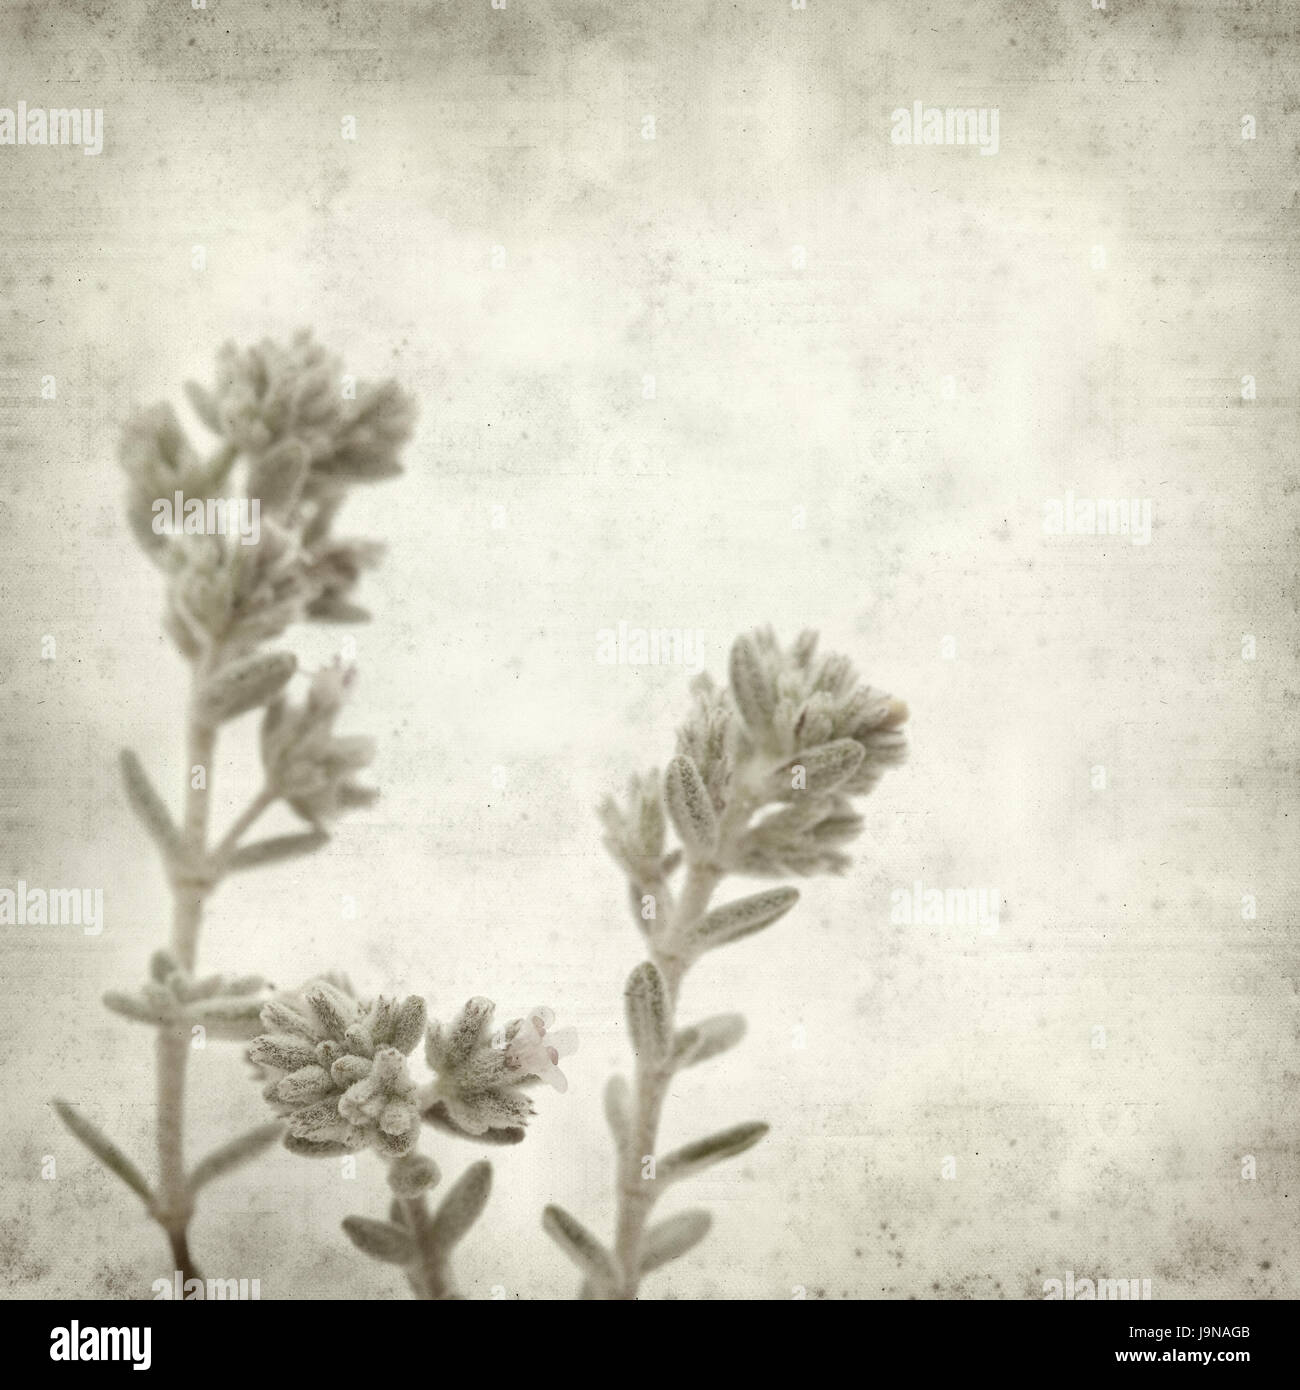 textured old paper background with Micromeria plant Stock Photo